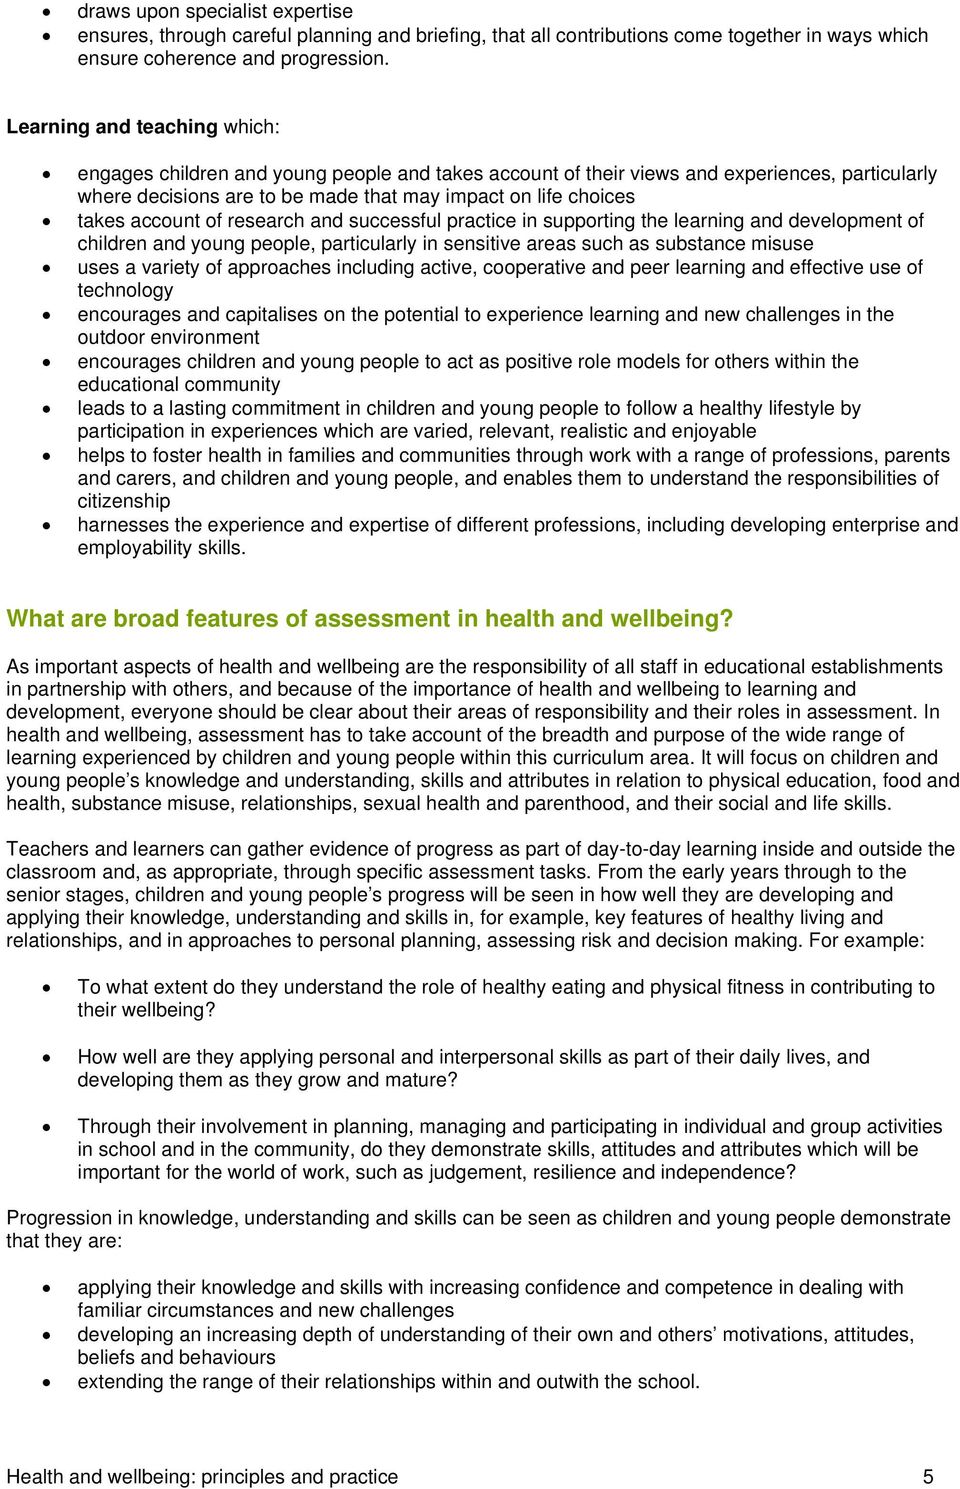 account of research and successful practice in supporting the learning and development of children and young people, particularly in sensitive areas such as substance misuse uses a variety of